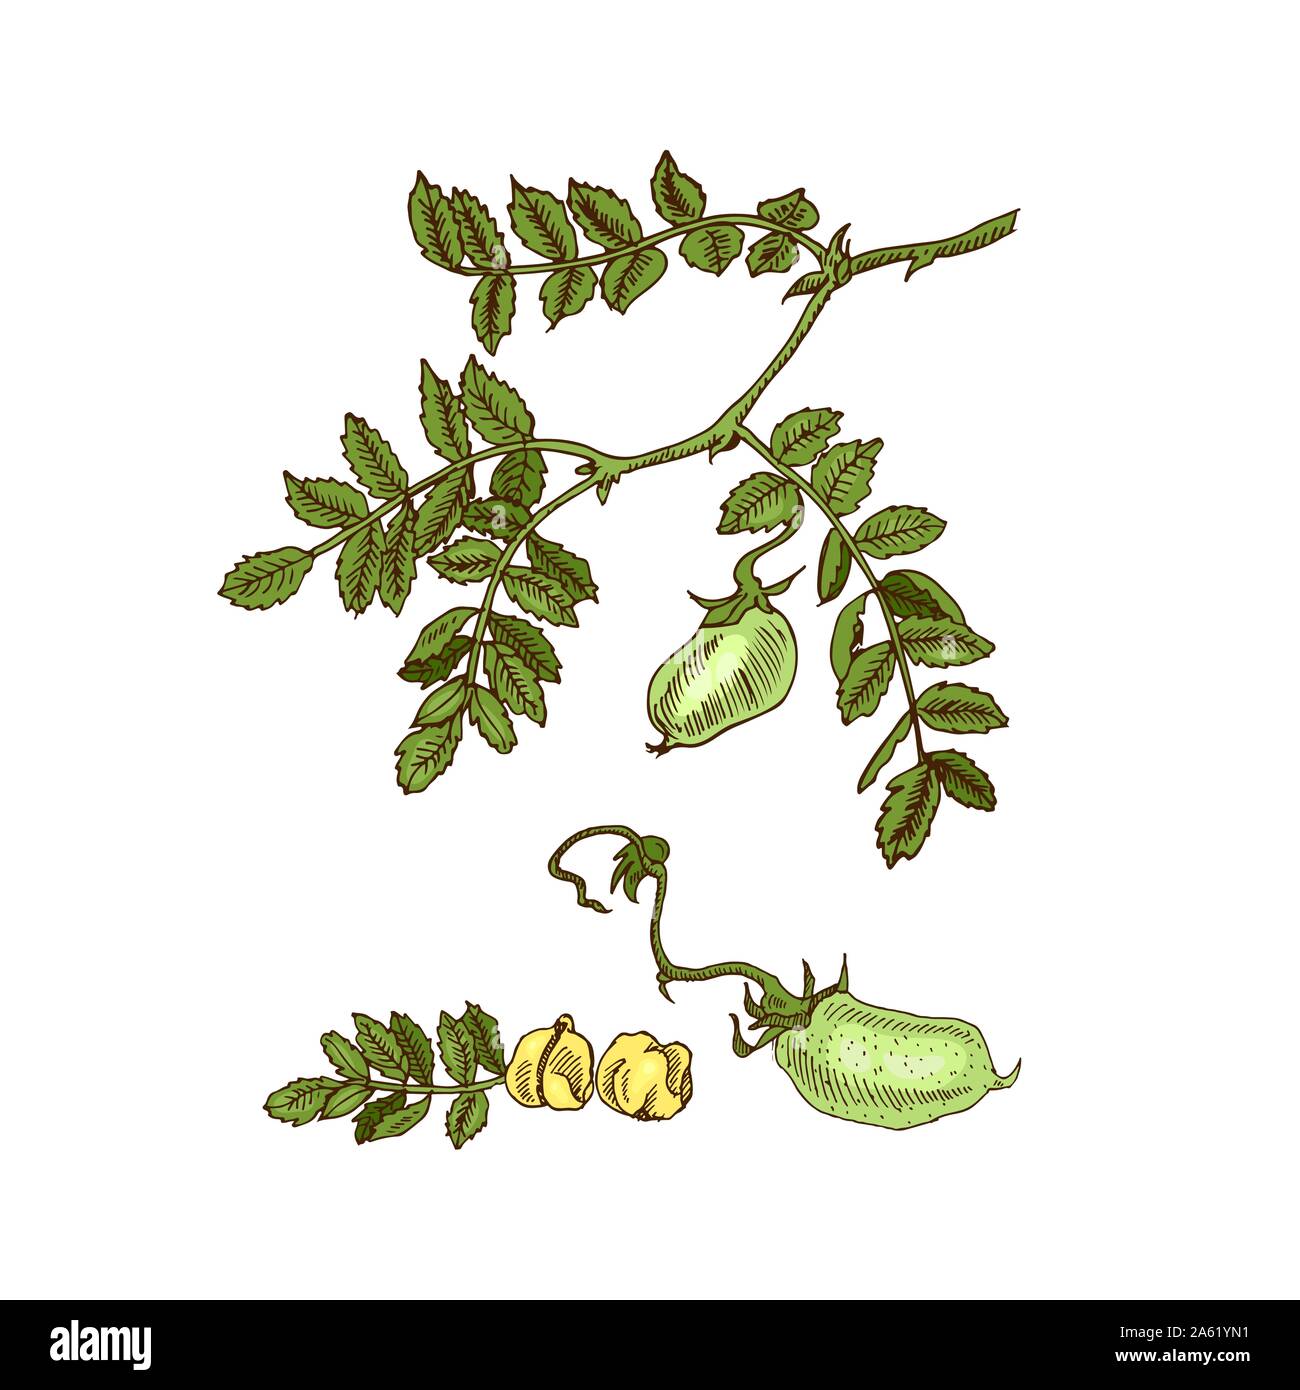 Soya Sketch. Detailed Hand Drawn Vector Black and White Illustration of  Green Soybeans Stock Illustration - Illustration of plant, seed: 155474120